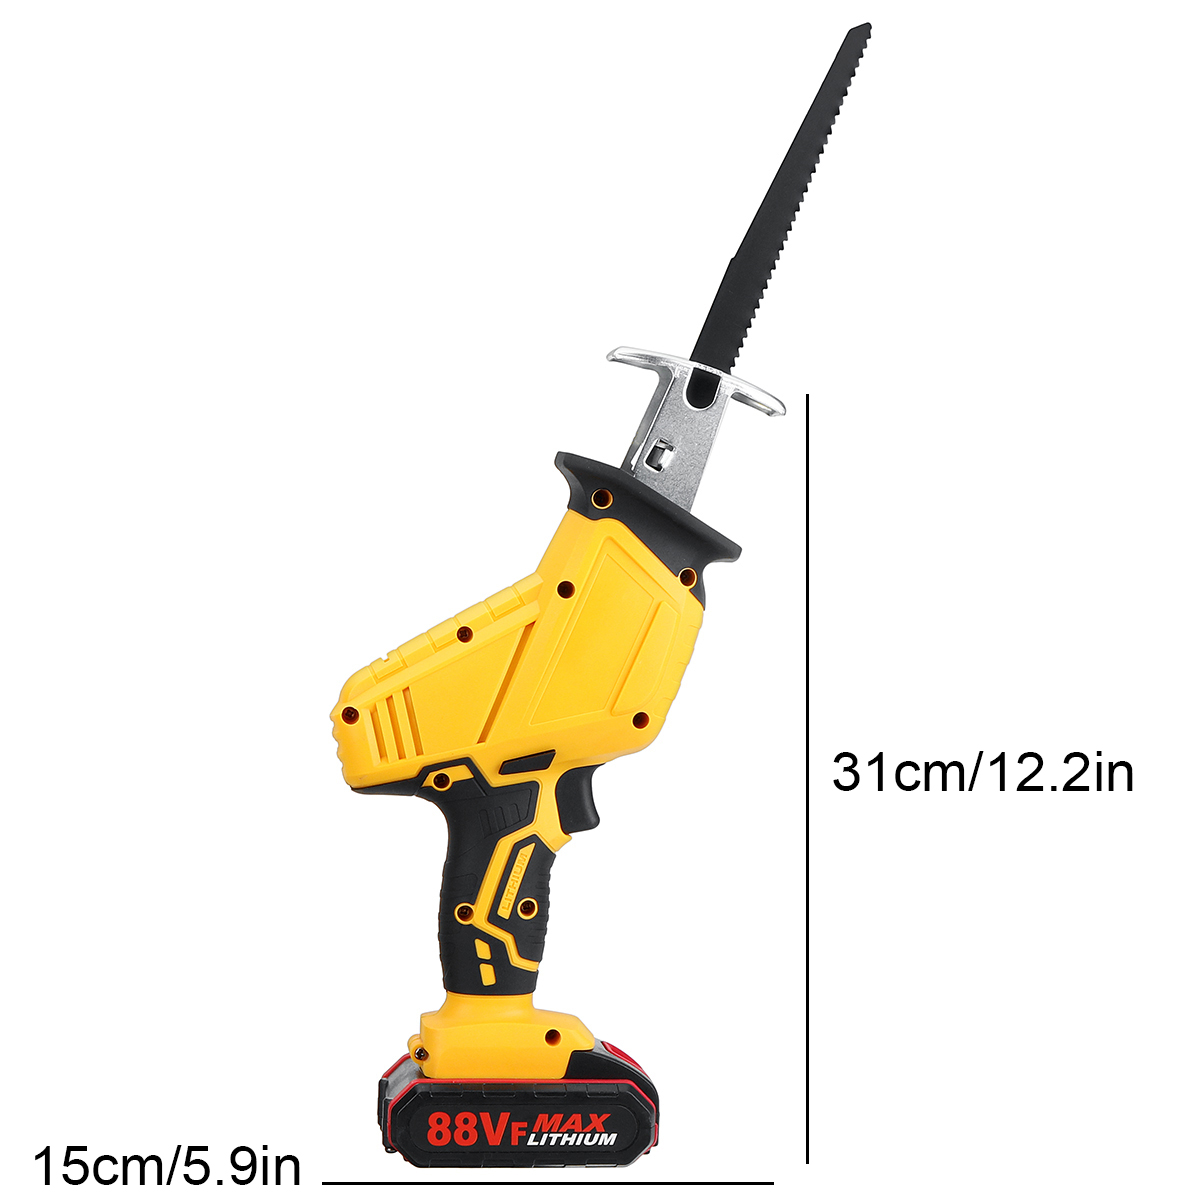 88VF-Cordless-Electric-Reciprocating-Saw-W-4-Blades--1or2-Battery-for-Worx-Woodworking-Wood-Cutting--1878507-10